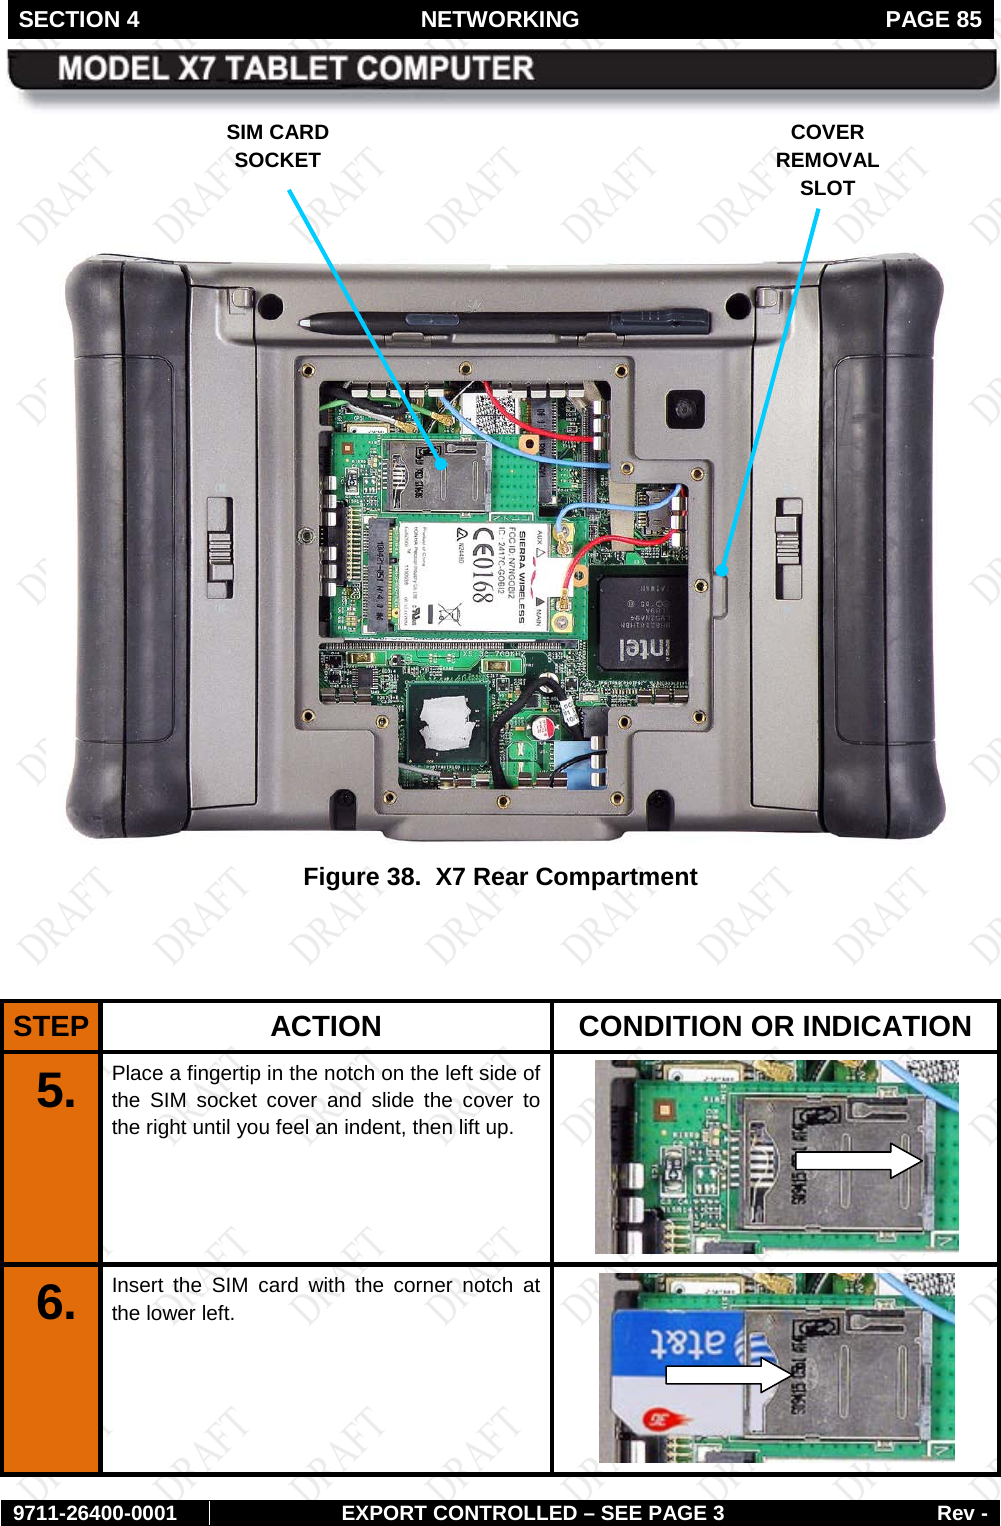 SECTION 4 NETWORKING  PAGE 85        9711-26400-0001 EXPORT CONTROLLED – SEE PAGE 3 Rev -     Figure 38.  X7 Rear Compartment   STEP  ACTION CONDITION OR INDICATION 5.  Place a fingertip in the notch on the left side of the SIM socket cover and slide the cover to the right until you feel an indent, then lift up.  6.  Insert the SIM card with the corner notch at the lower left.  SIM CARD SOCKET COVER REMOVAL SLOT 